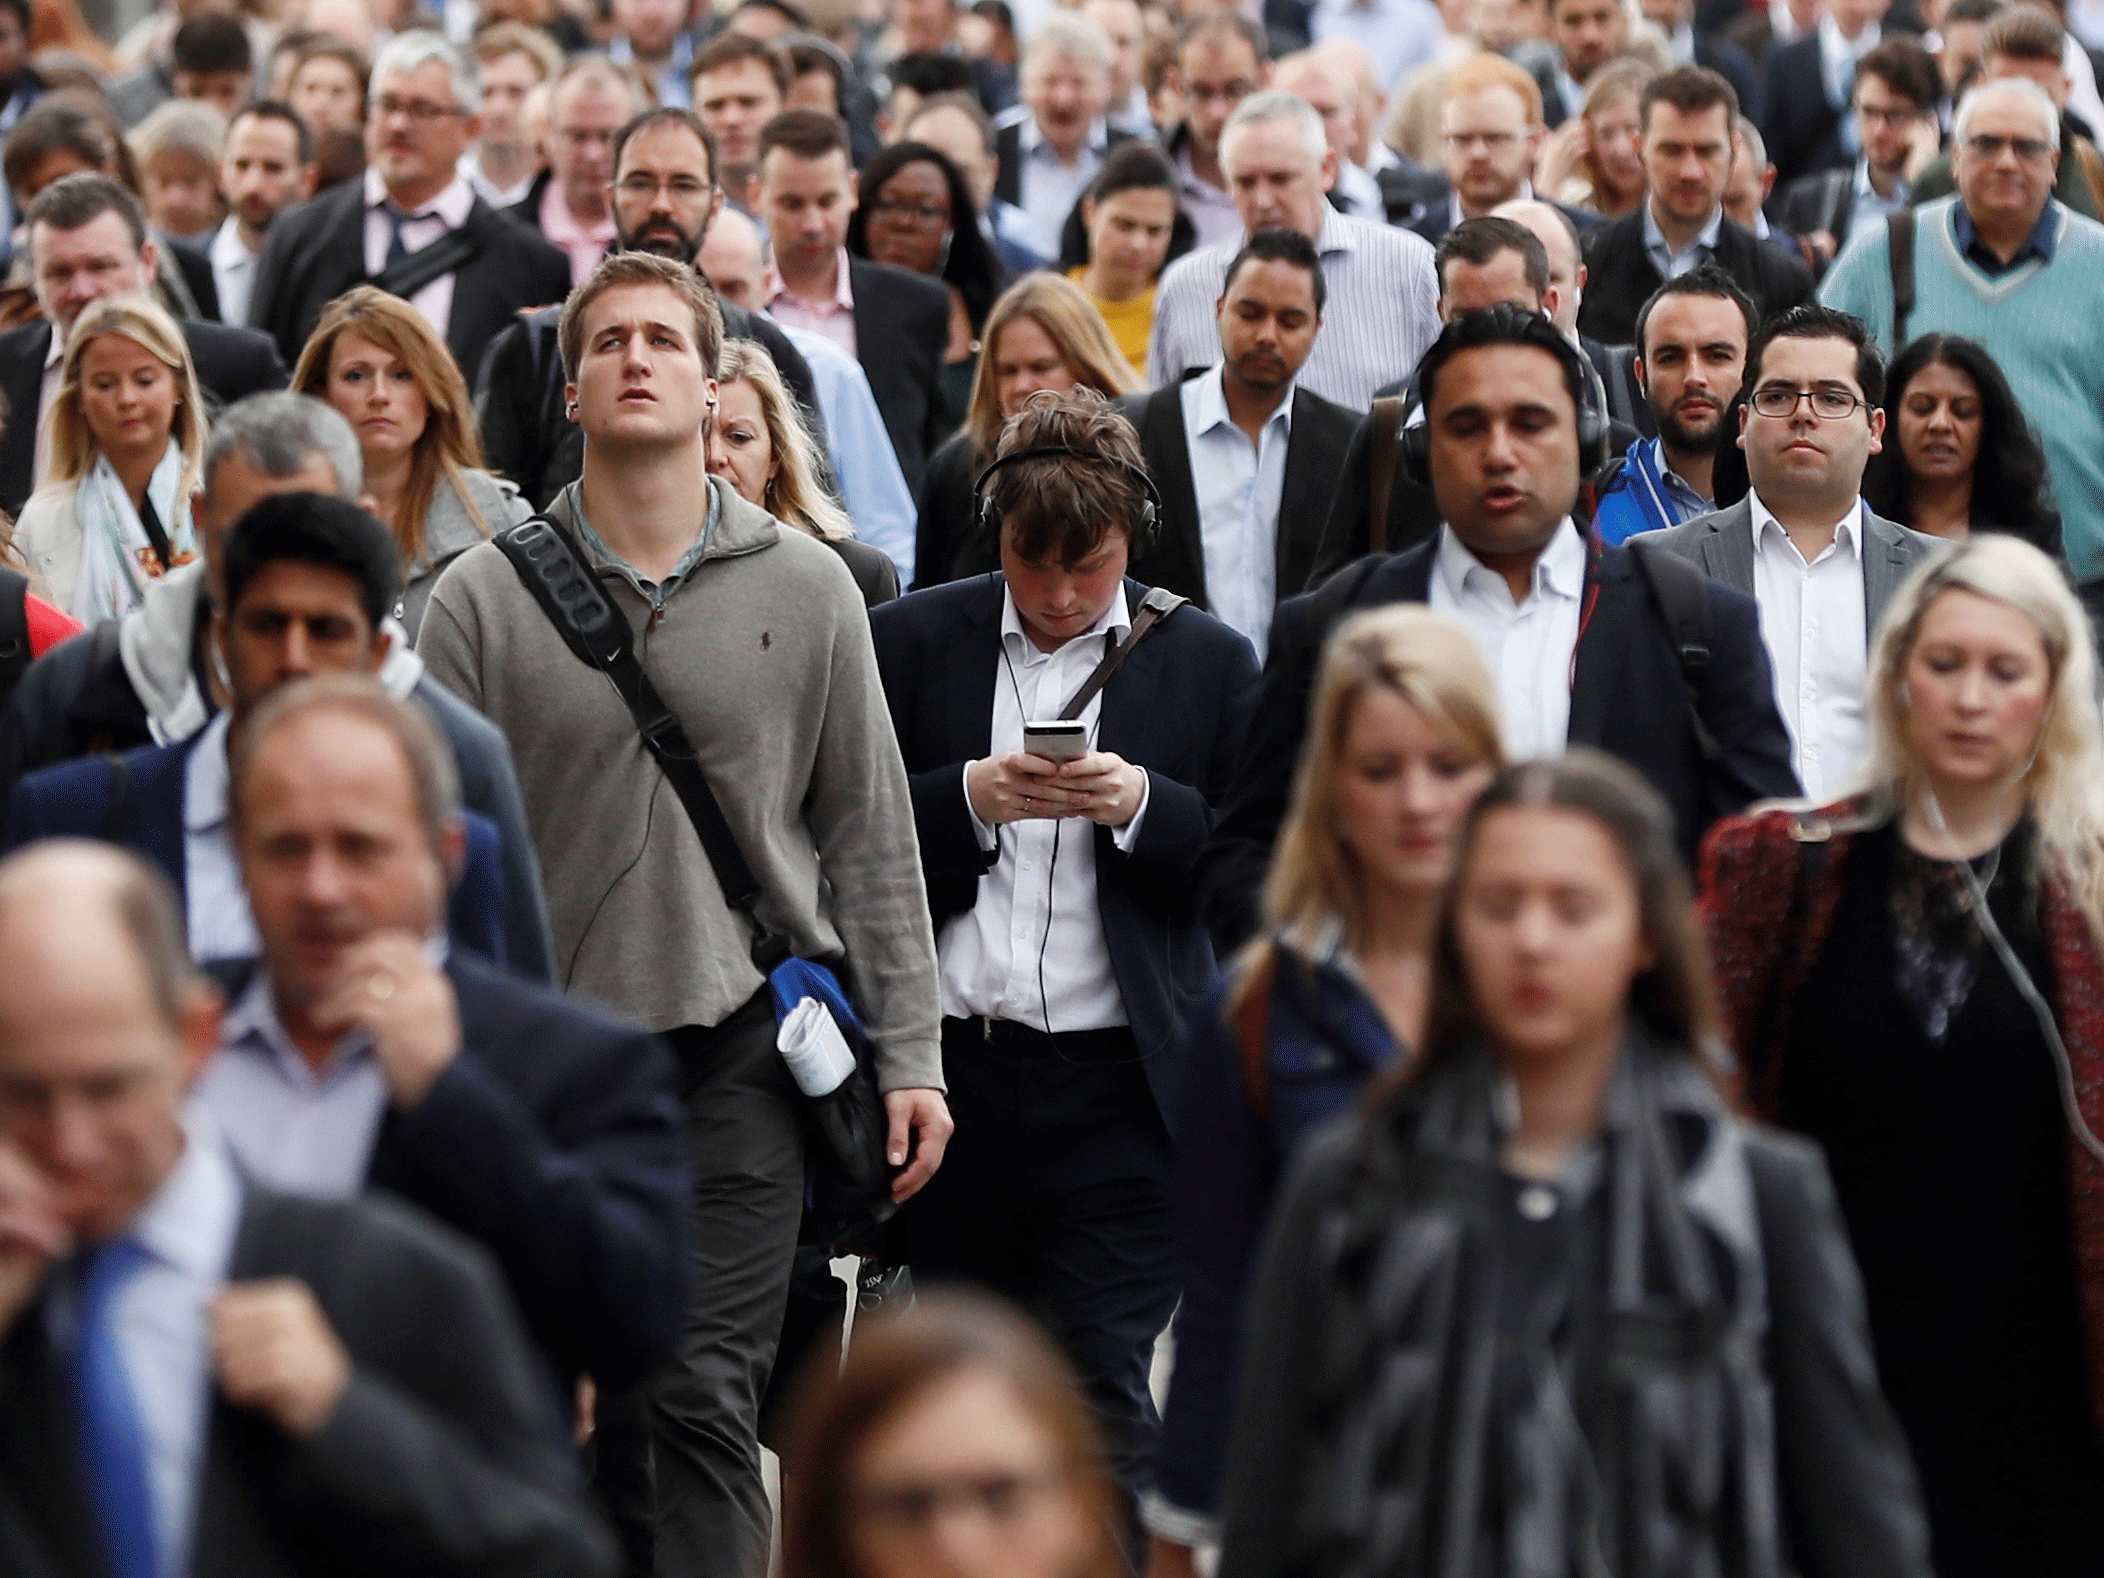 Only 6 per cent of management jobs are currently held by ethnic minorities